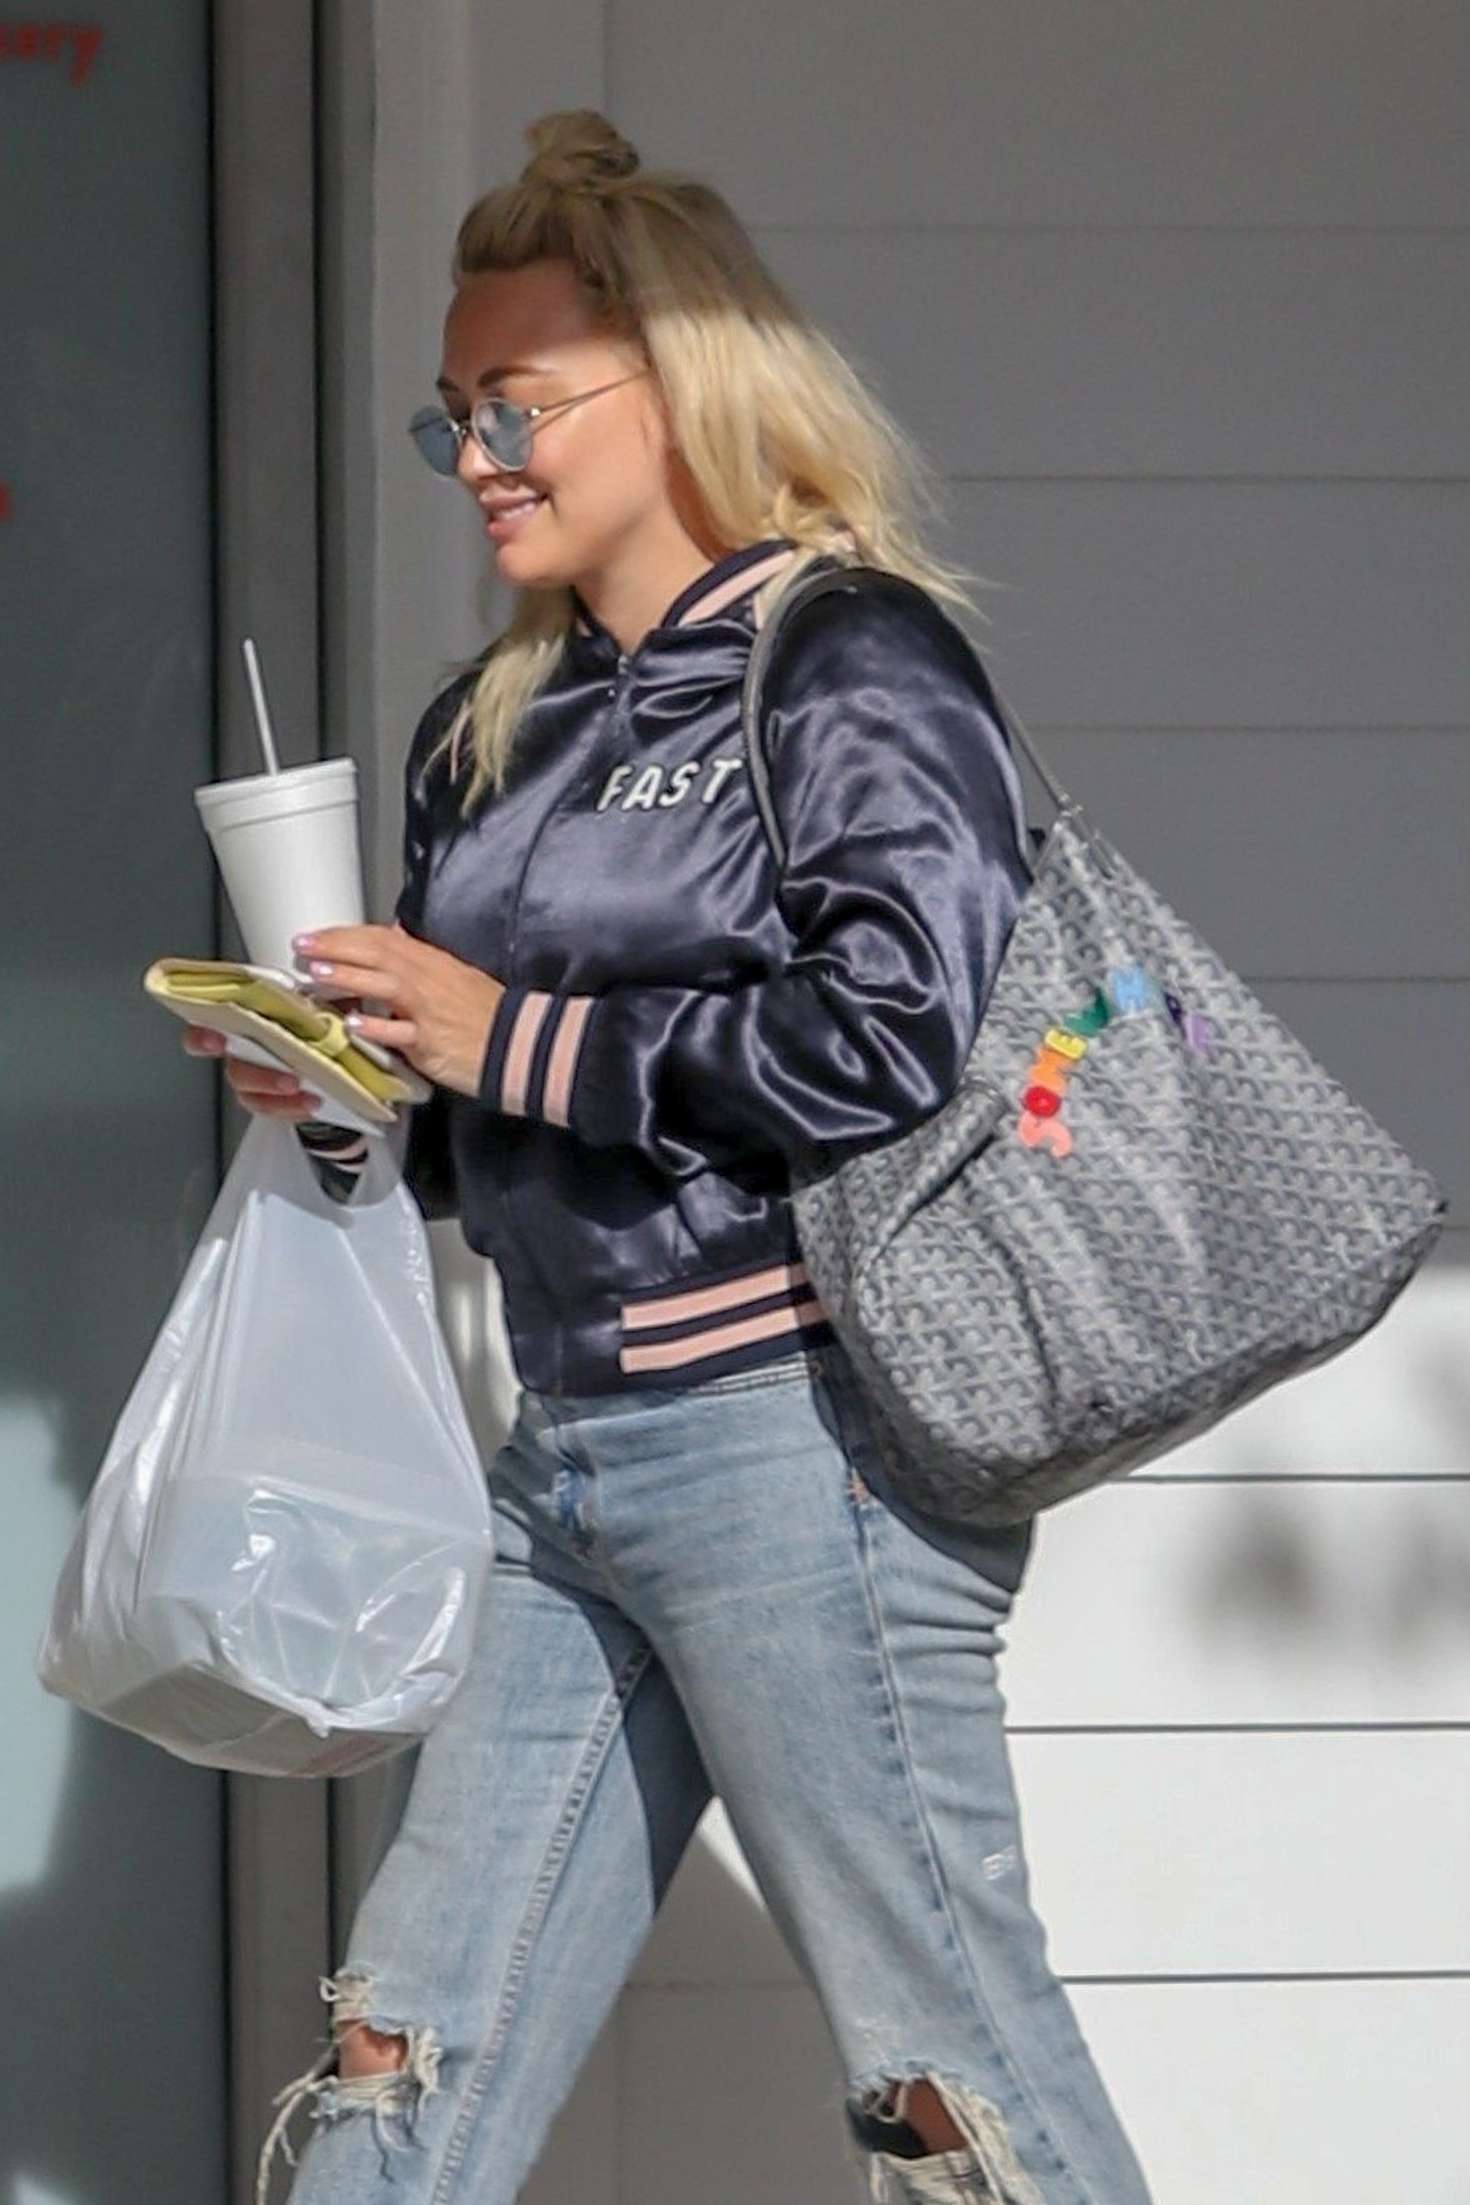 Hilary Duff in Ripped Jeans with a friend in Studio City